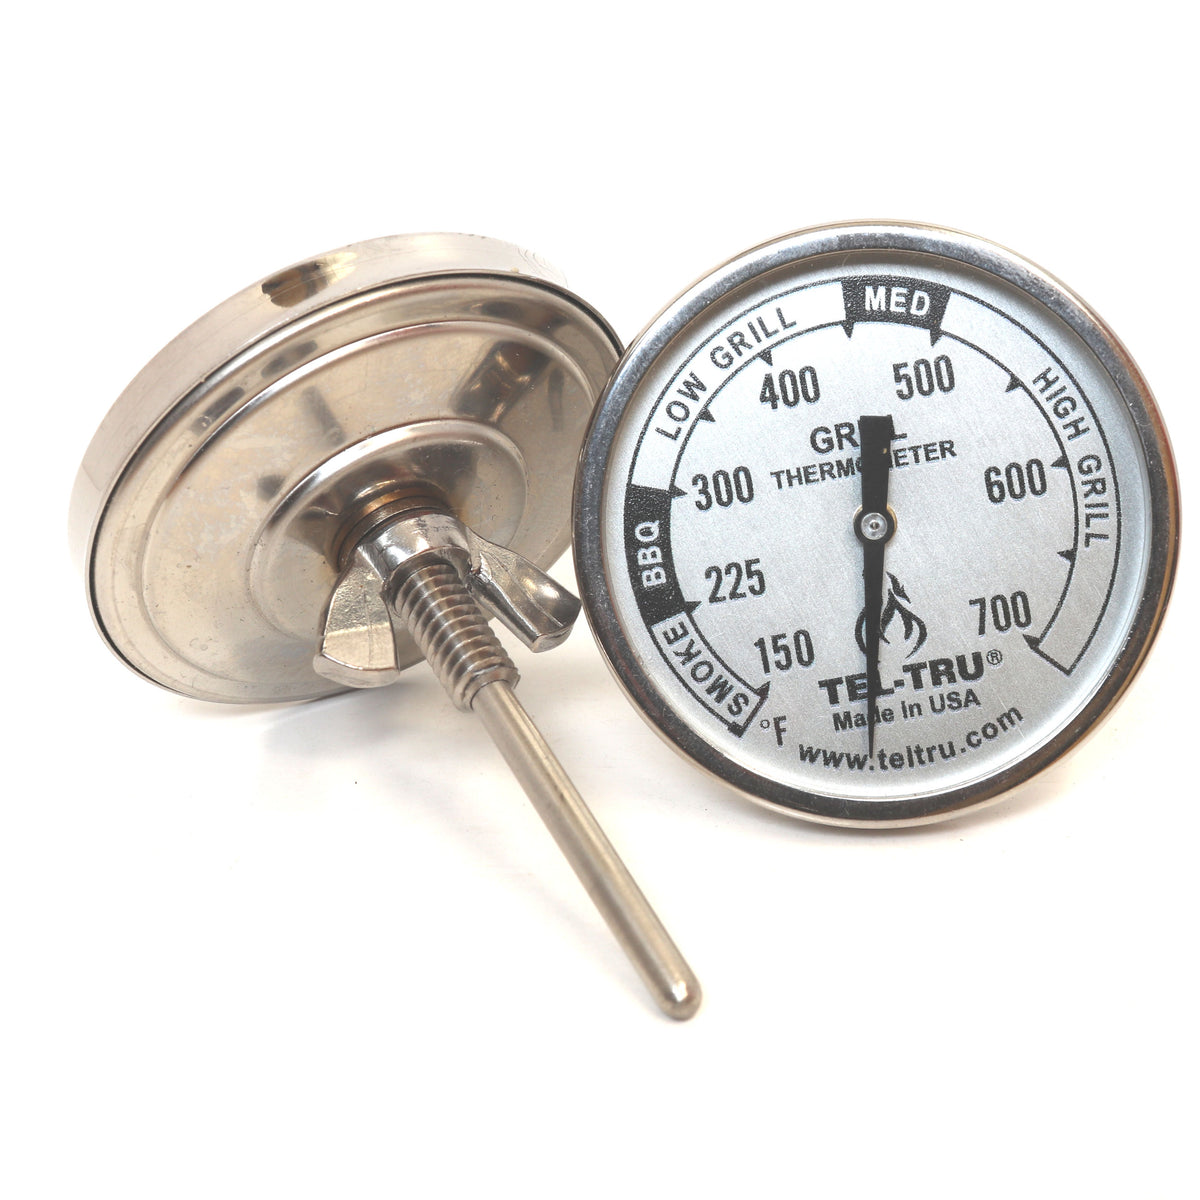  Tel-Tru BQ225 Barbecue Grill Thermometer, 2 inch dial and 2.13  inch stem : Patio, Lawn & Garden